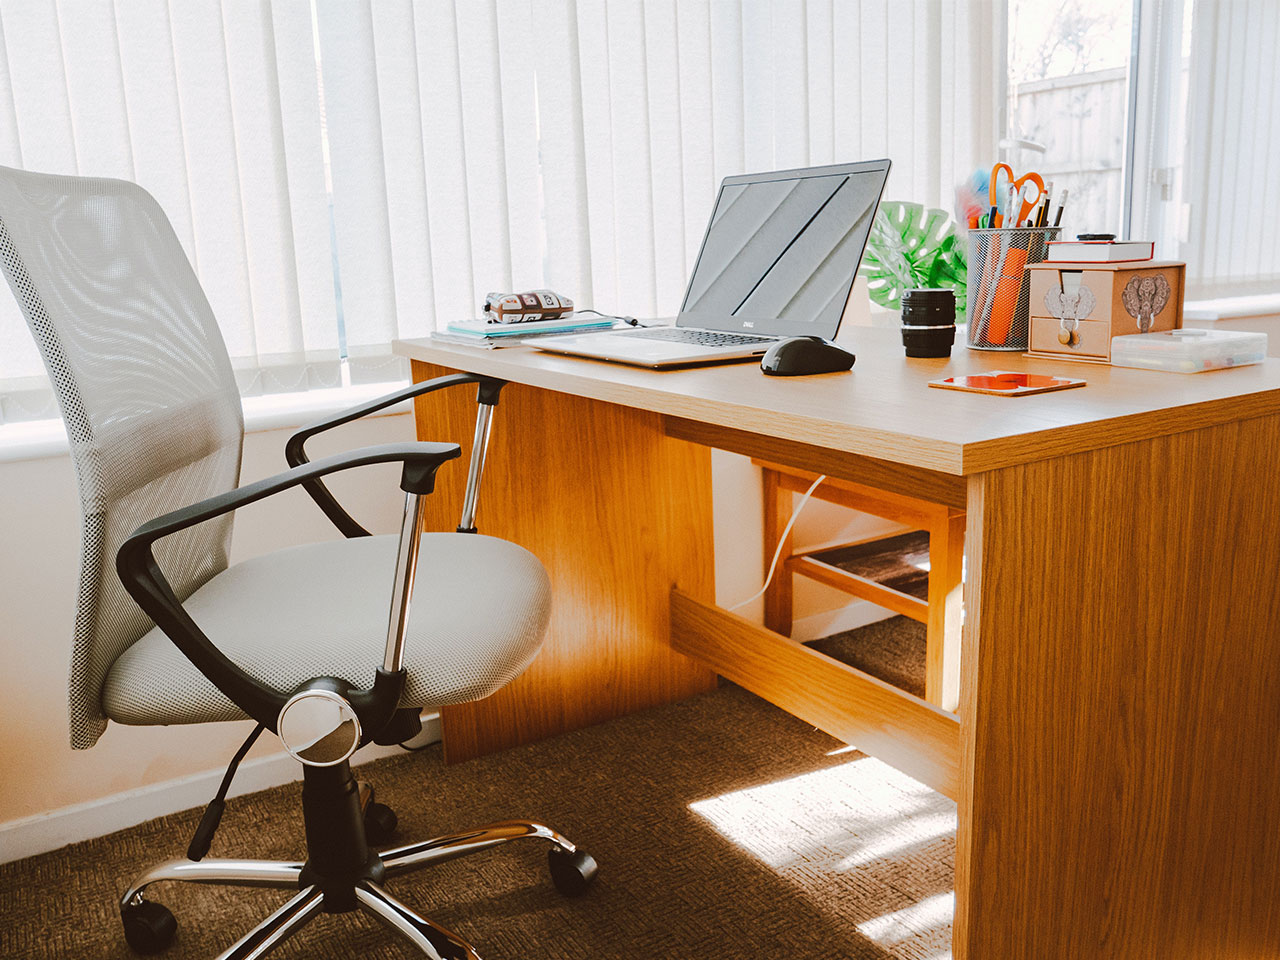 Top Office Organization Tips and Tricks to Boost Productivity